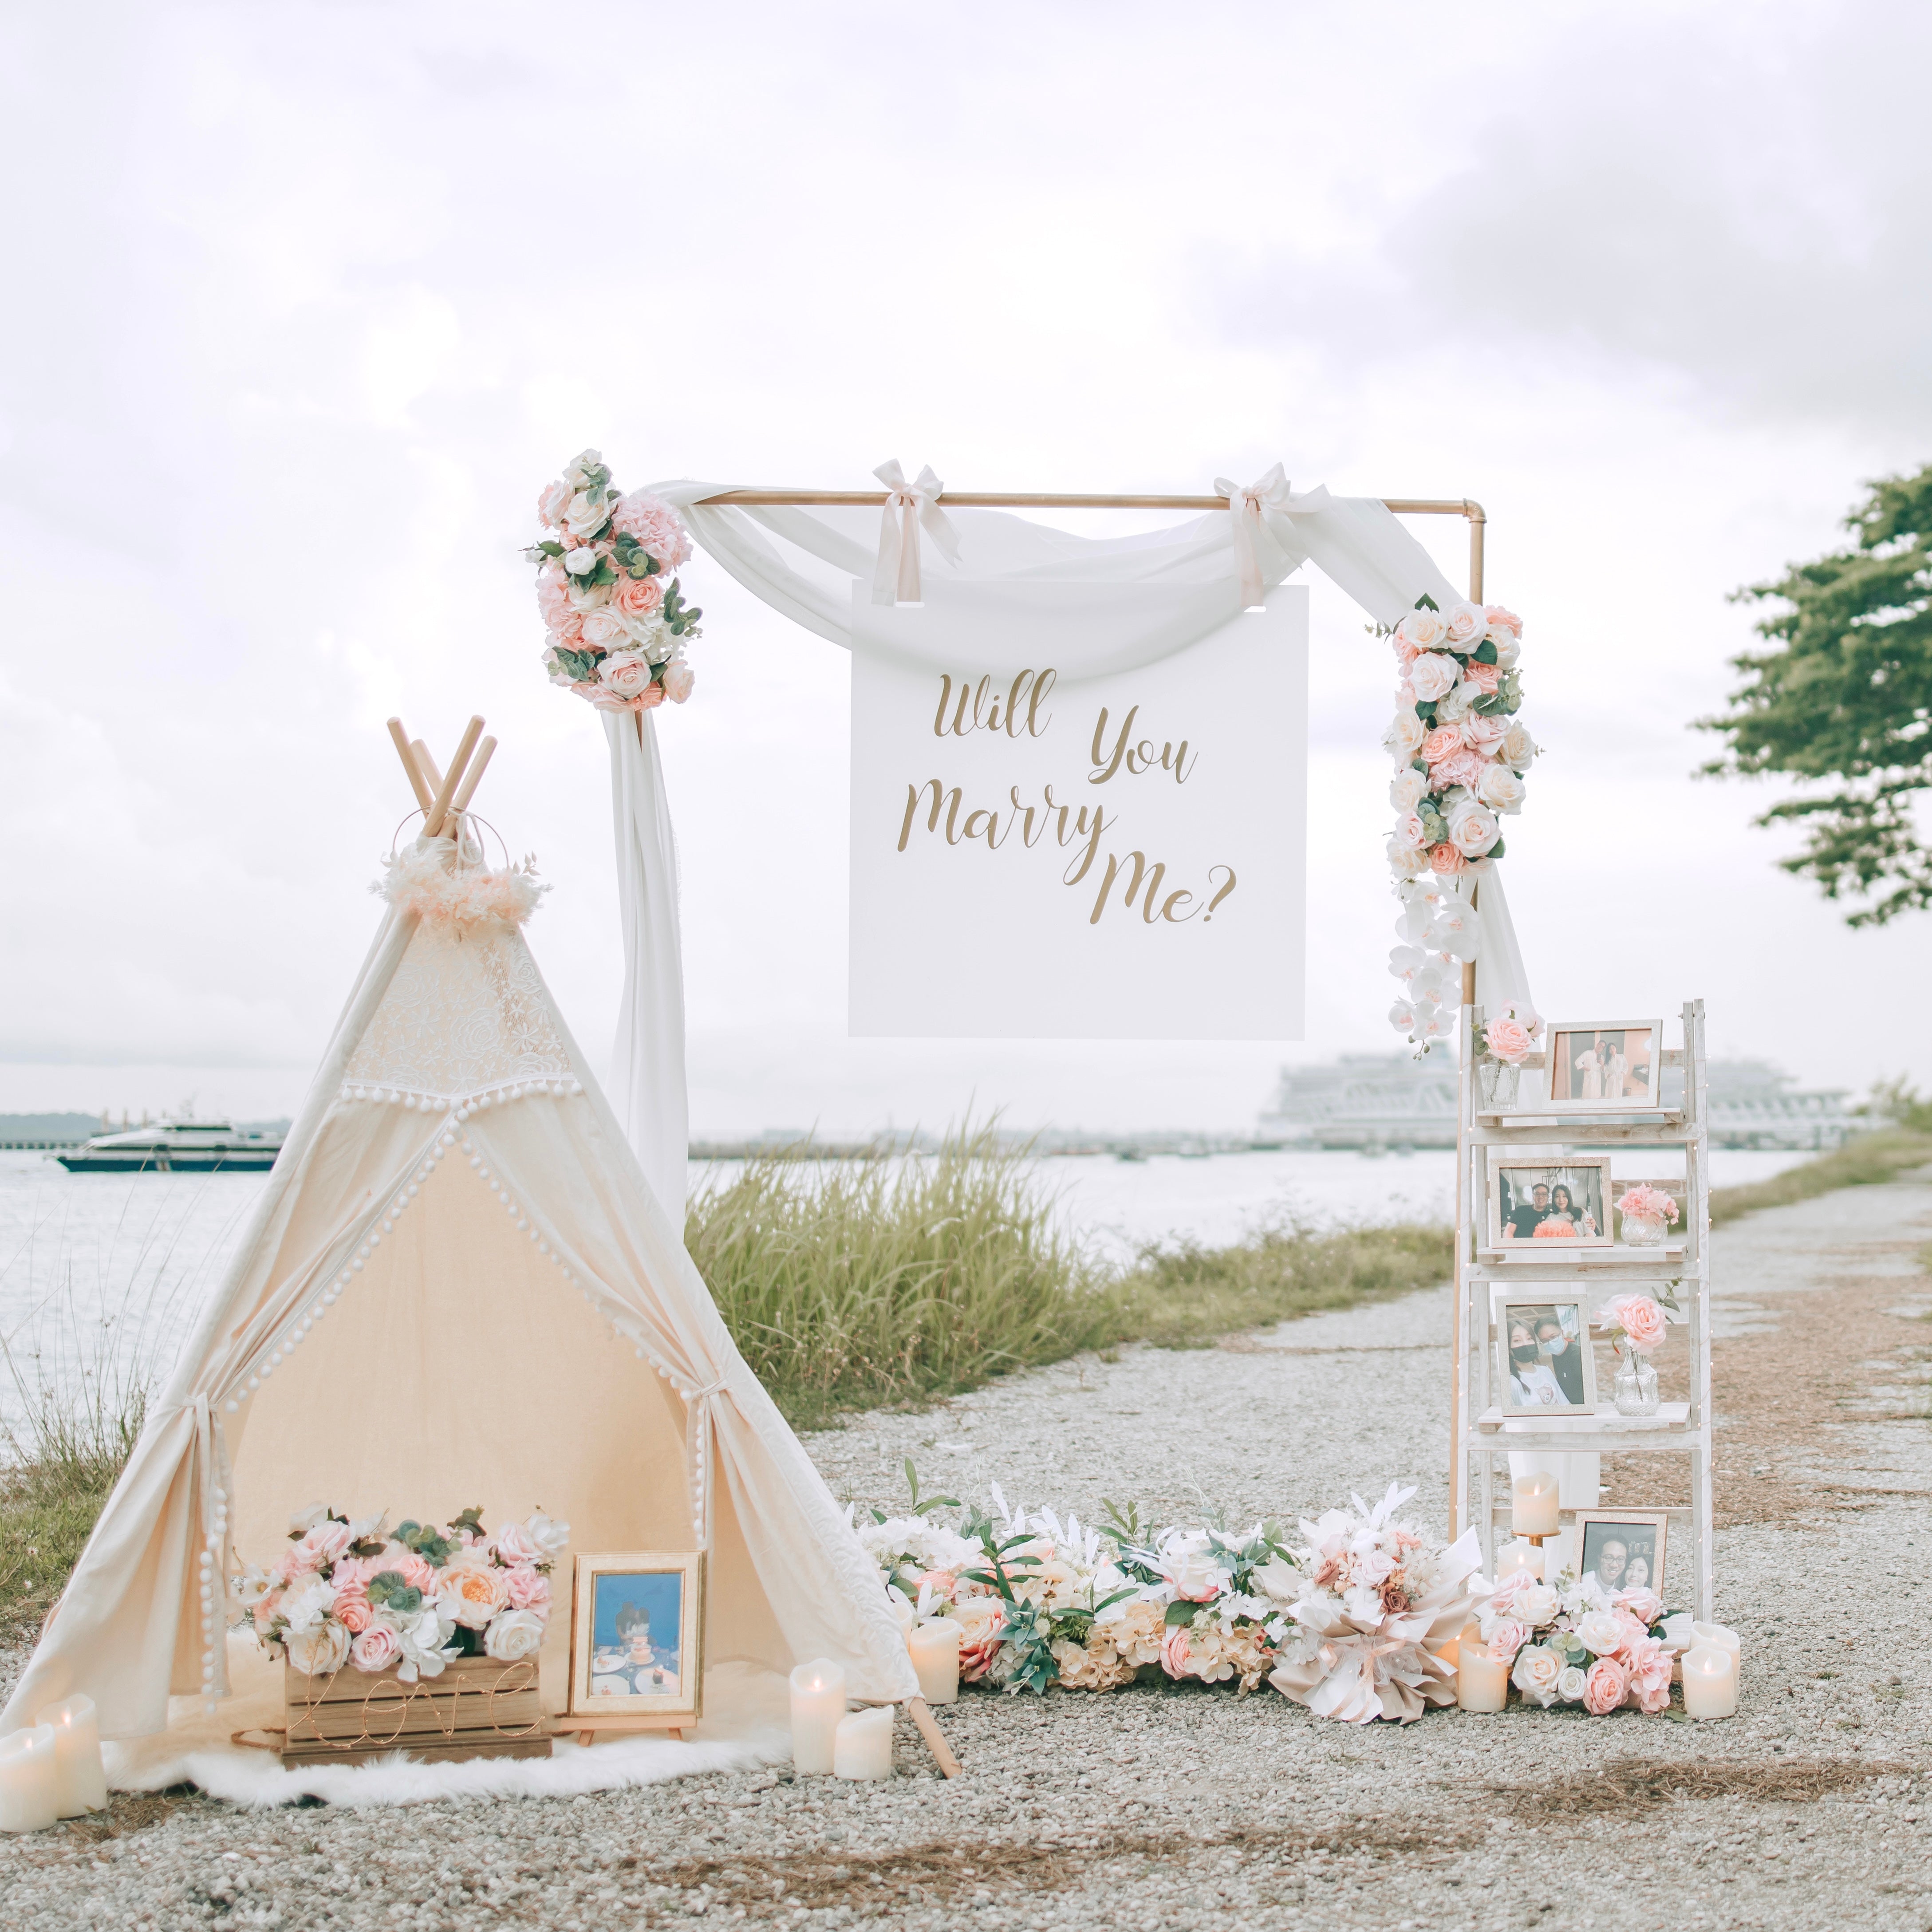 Romantic Outdoor Proposal Decor in Singapore with Balloons and Flowers by Style It Simply